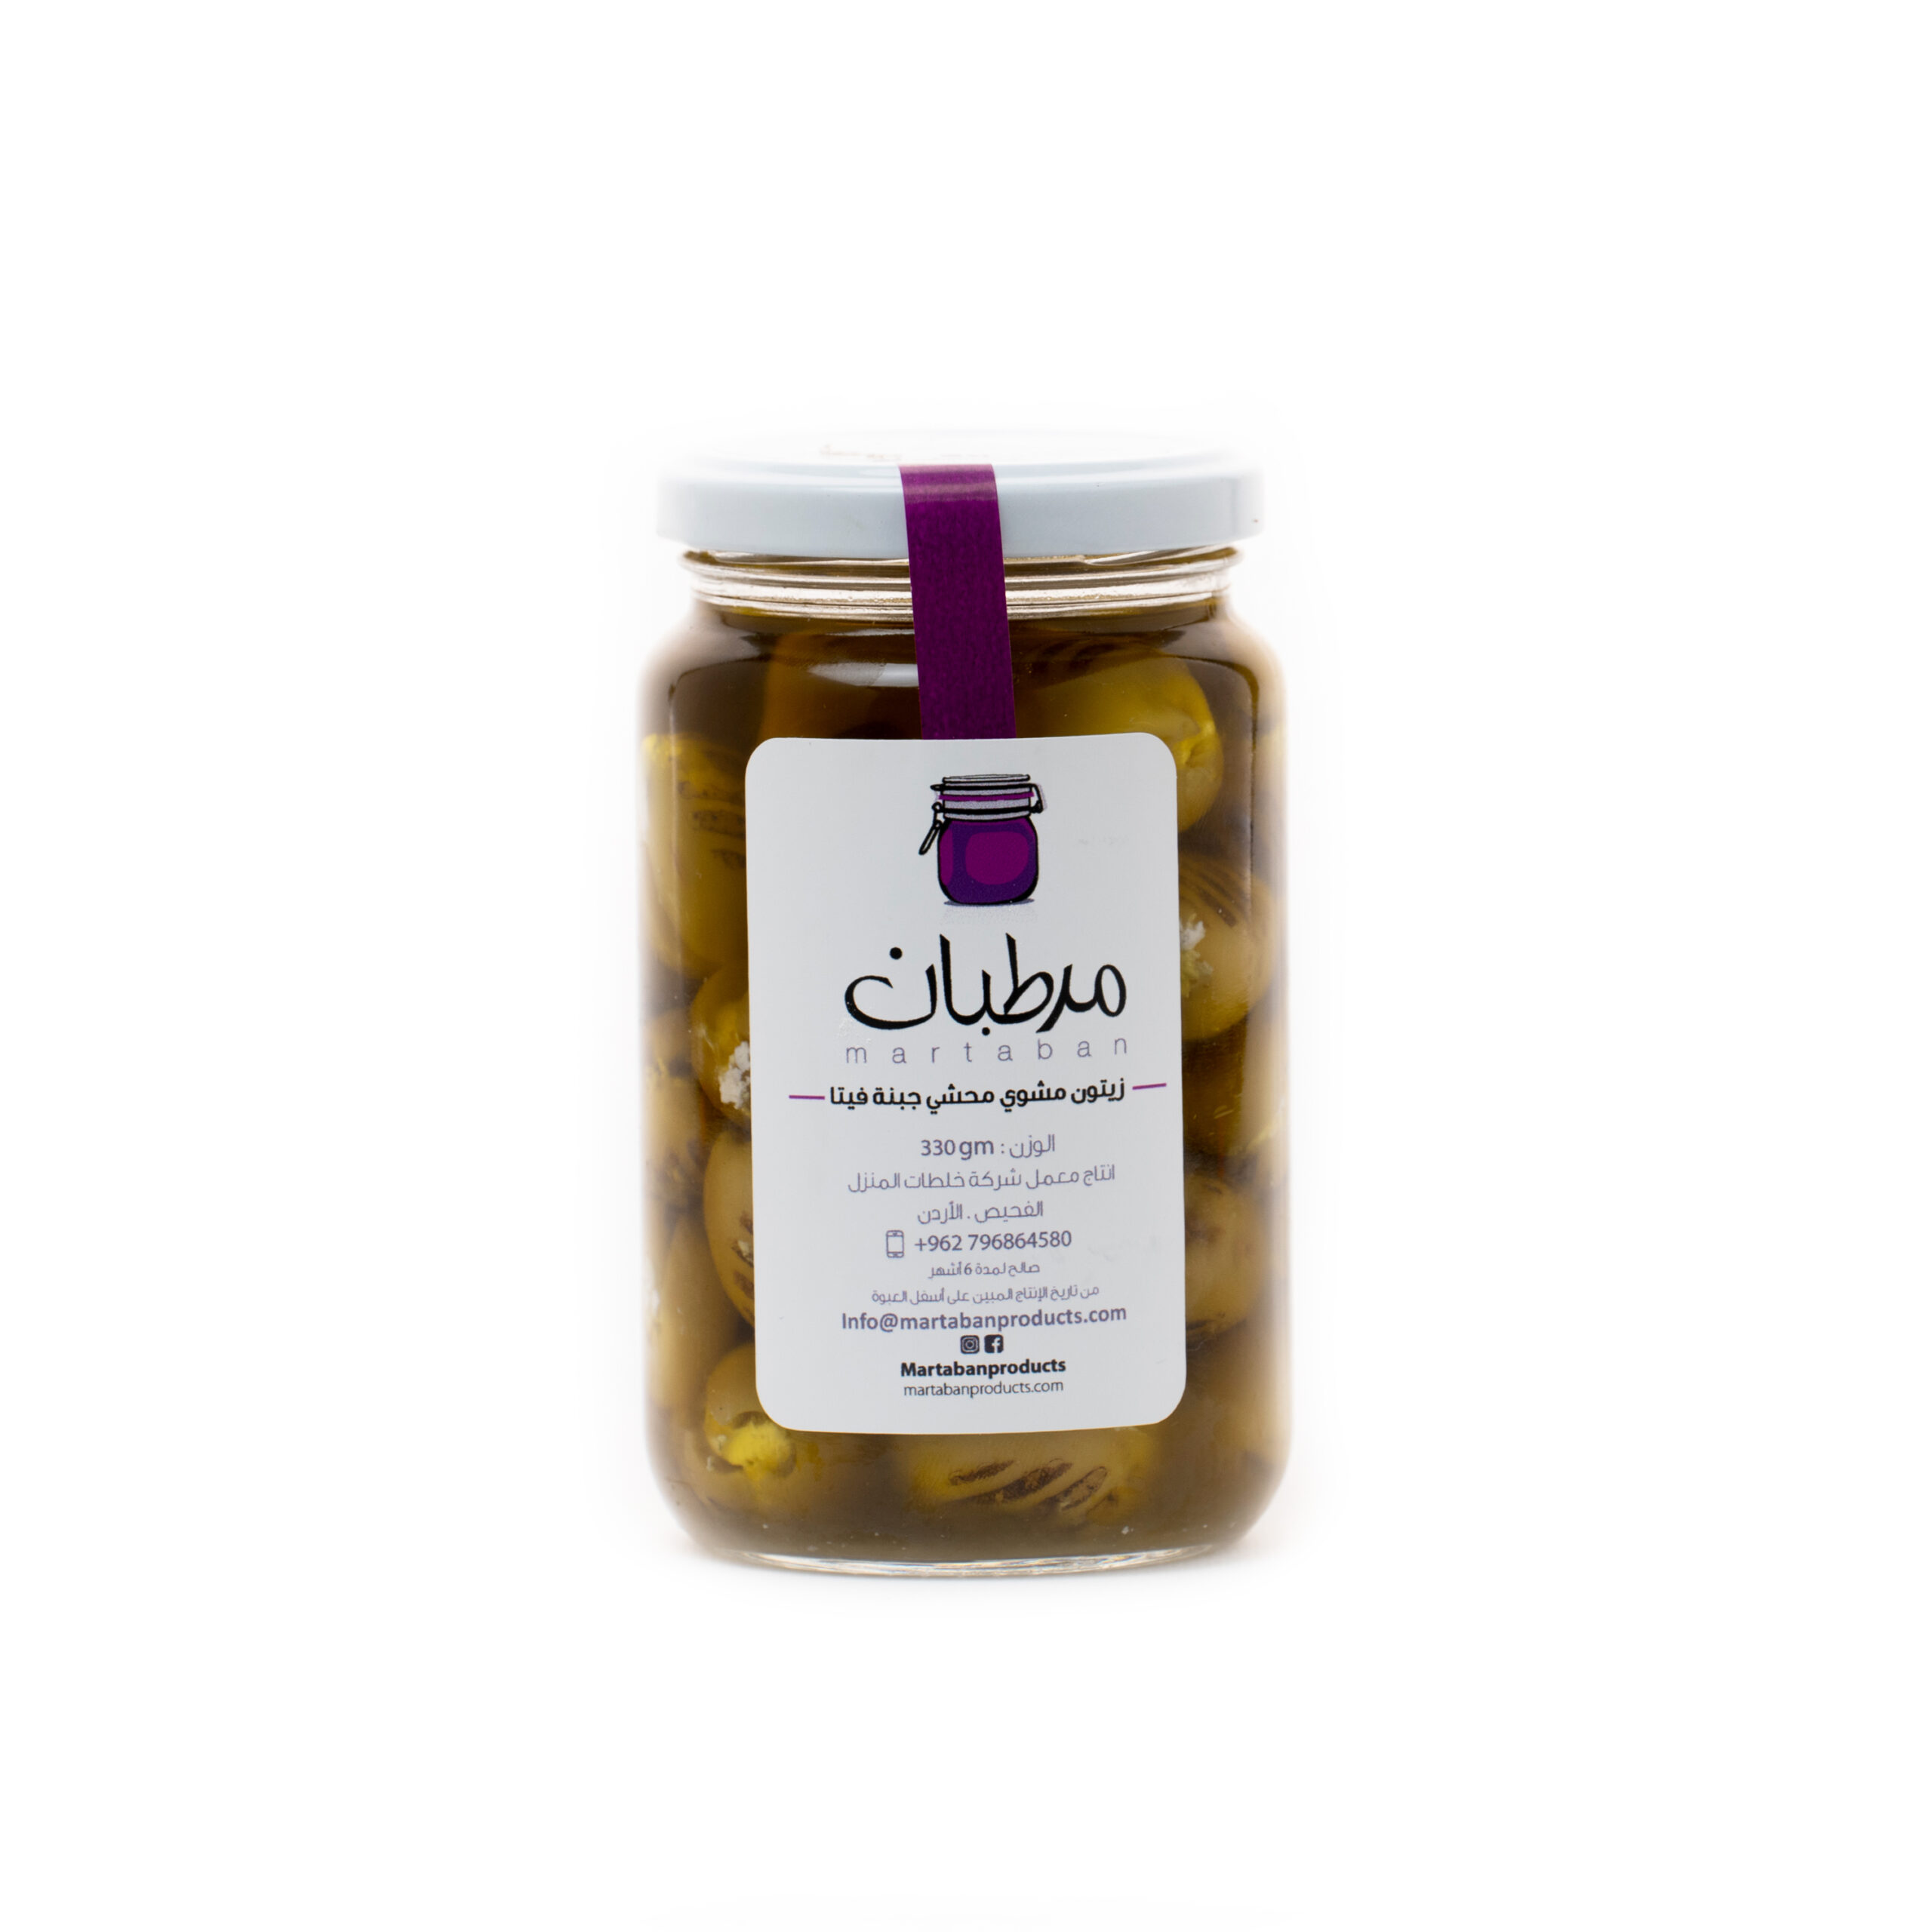 Grilled olives with seasoned feta